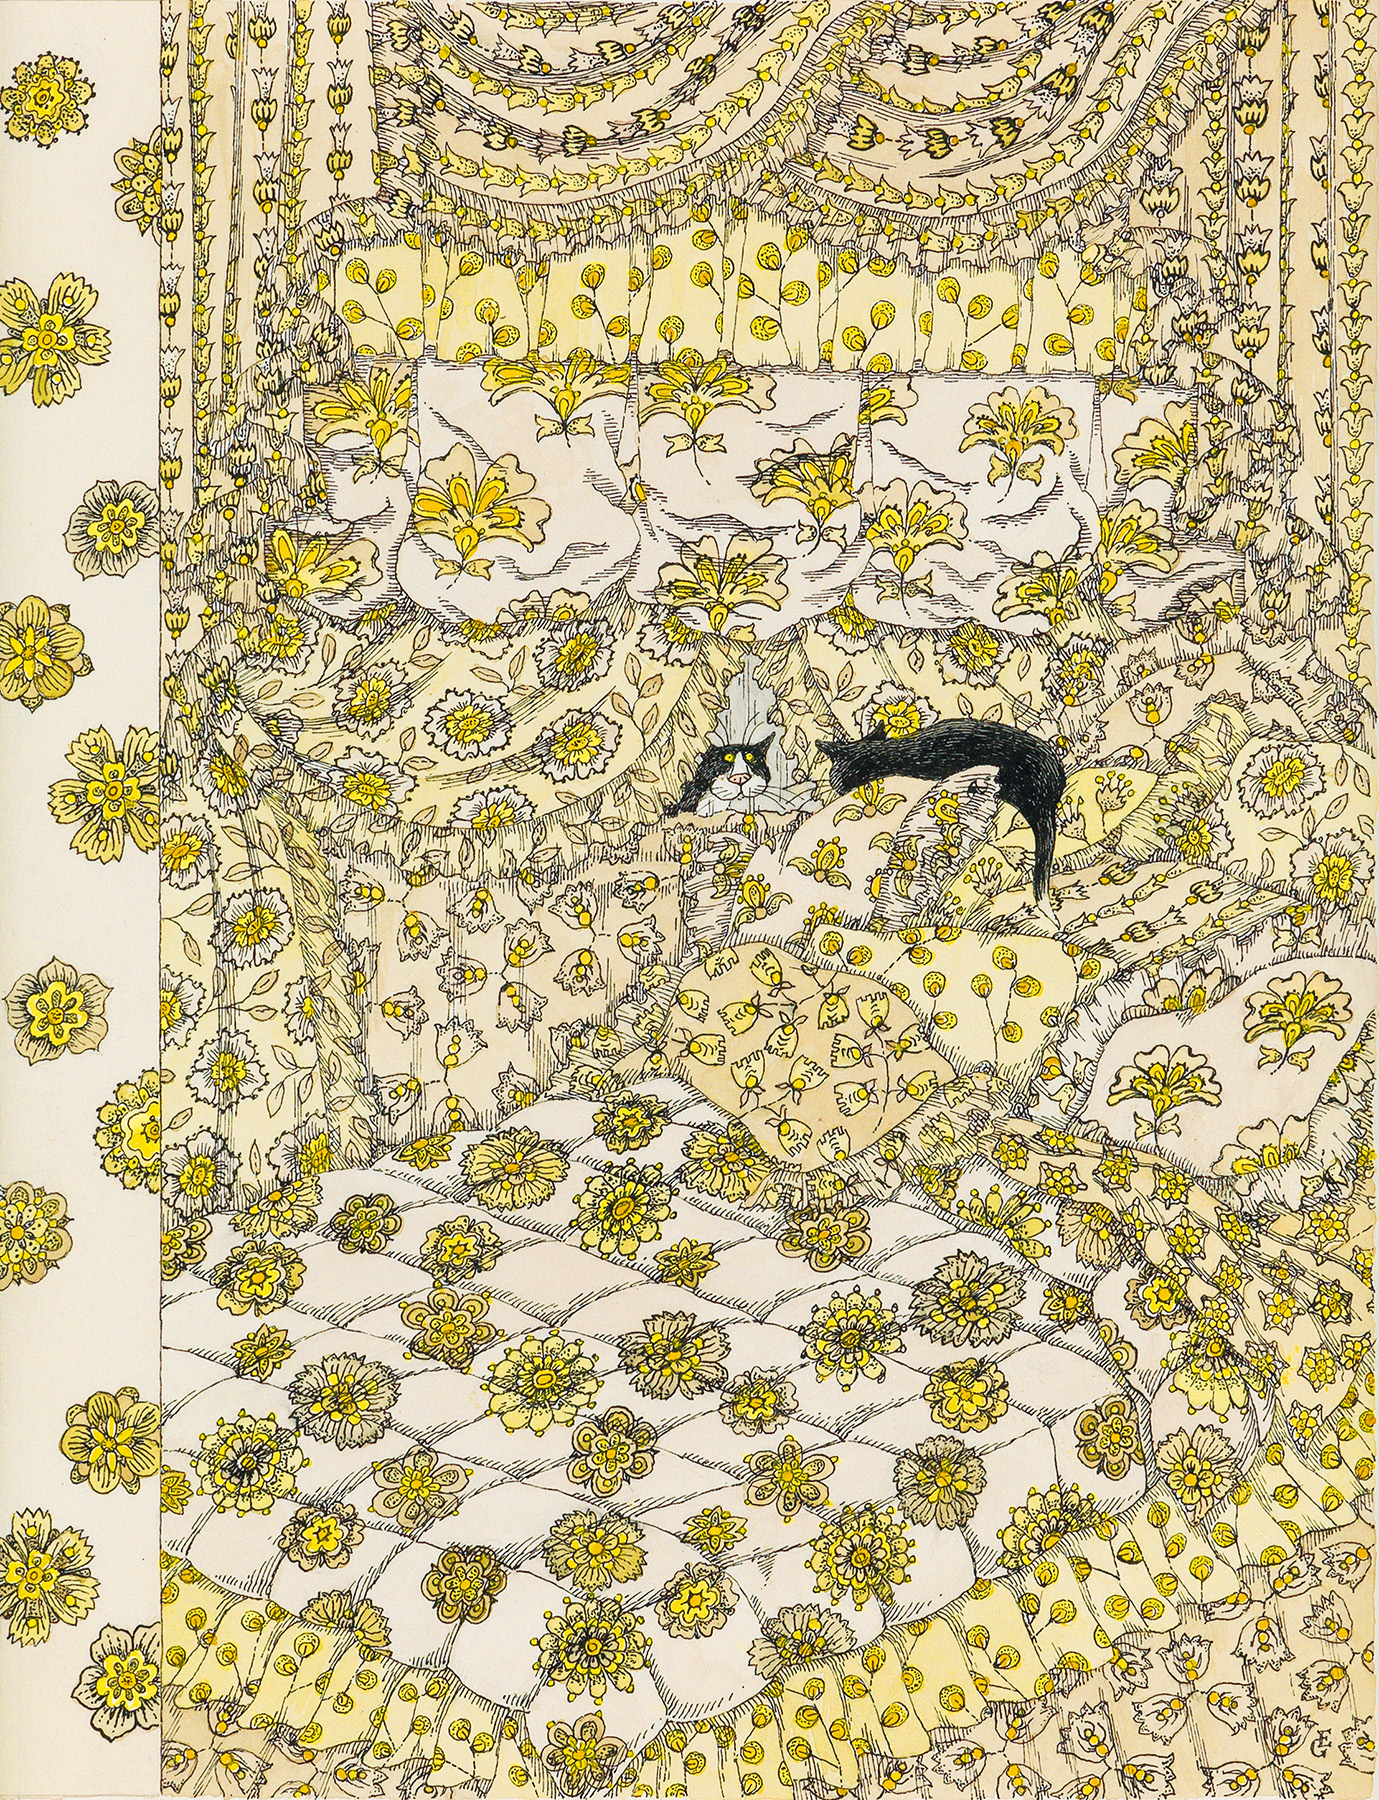 A New Yorker cover by the late Edward Gorey. It depicts two tuxedo cats looking at each other on an oversize bed, fitted with ruffles, shams, and pillows festooned with intricate yellow flowers. 